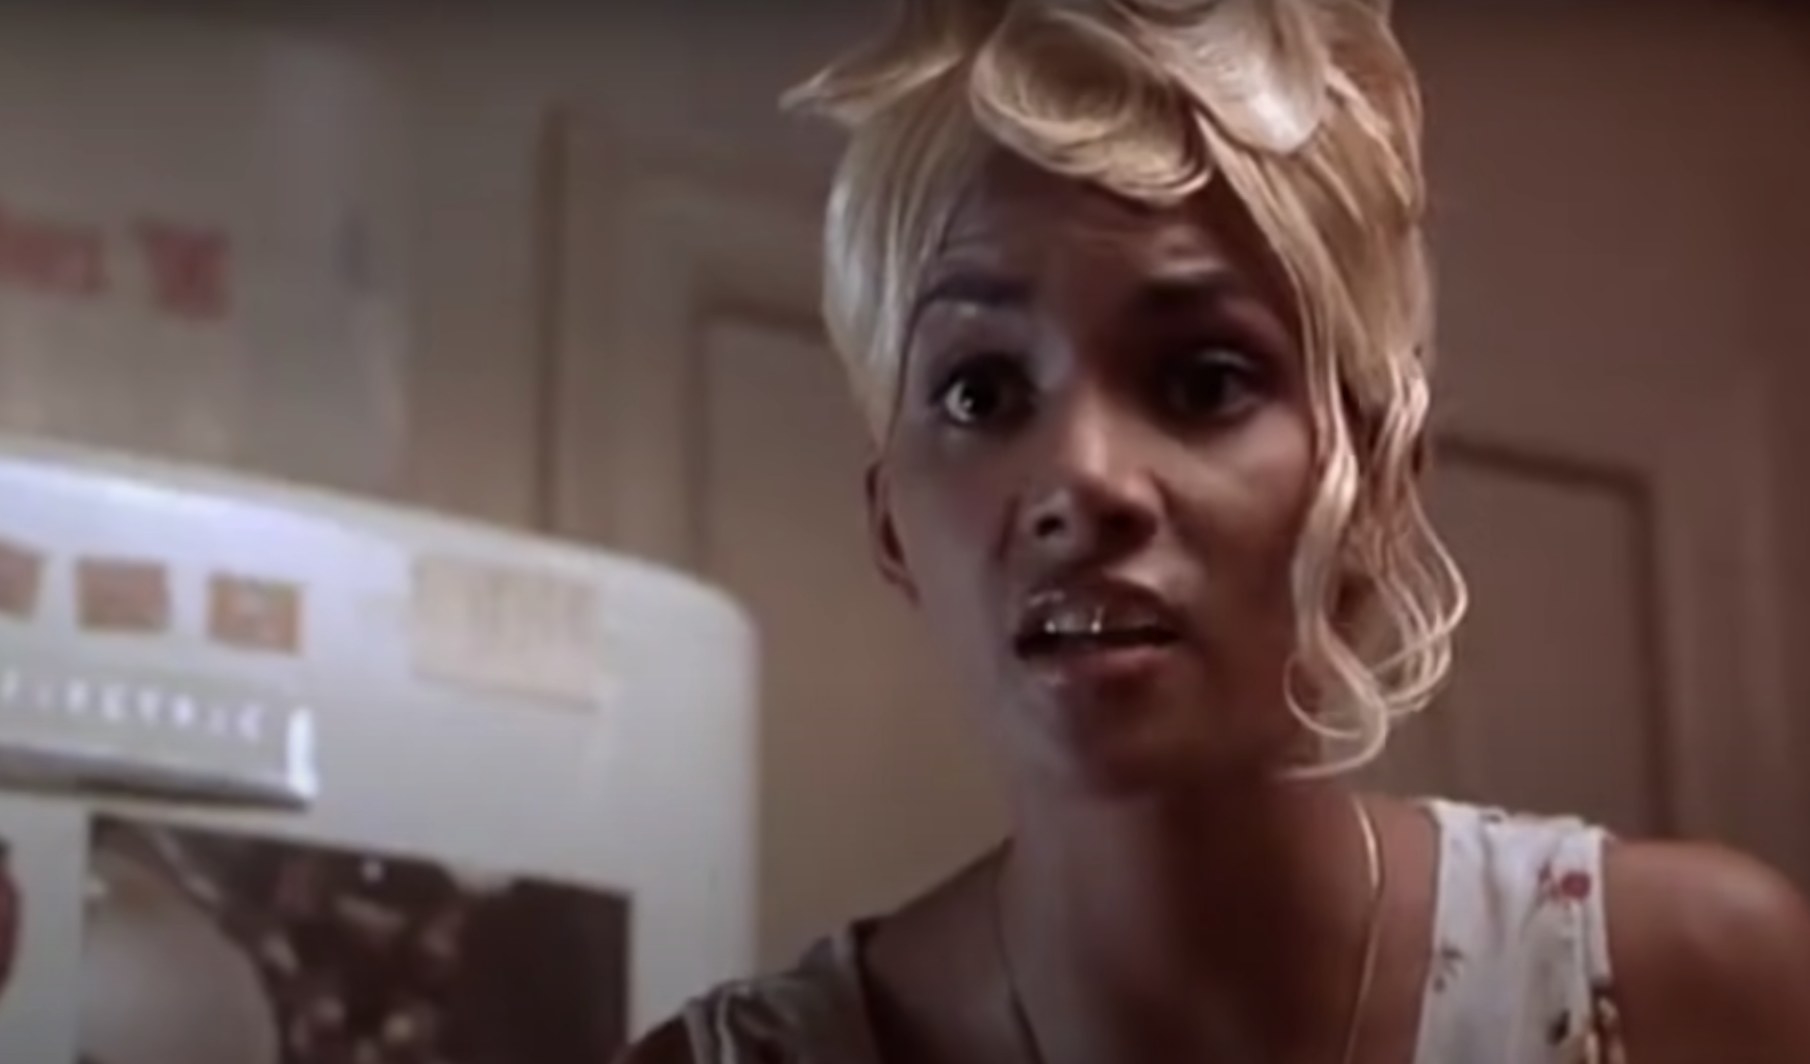 Actress Halle Berry wears a blonde wig and looks stunned at the camera.